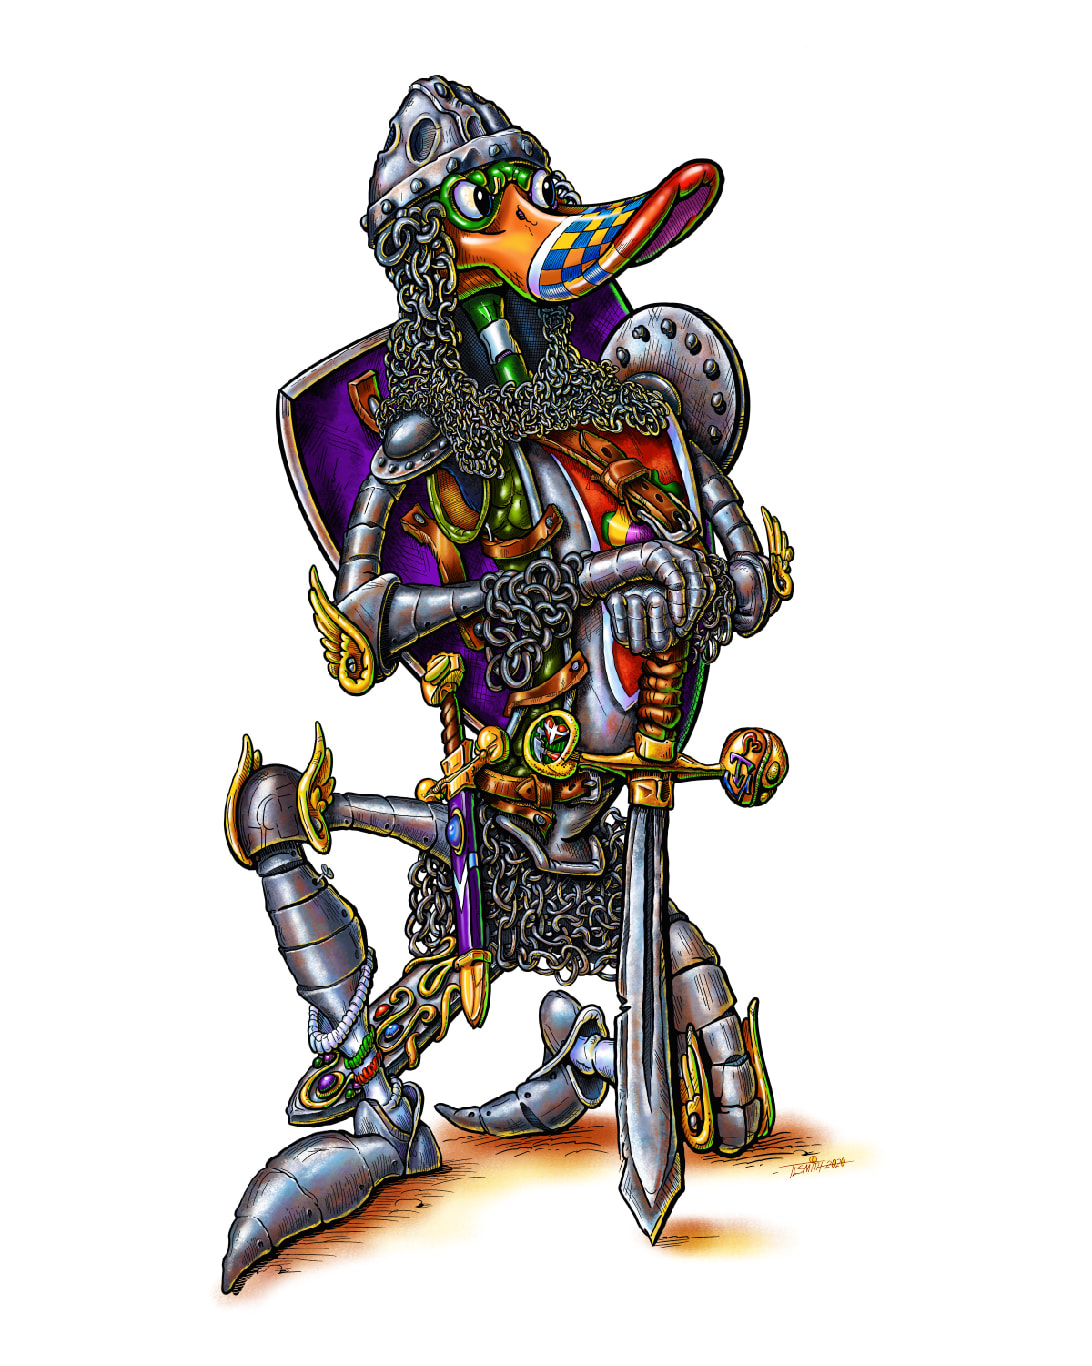 Cartoon of a duck in knight armor. The duck is very stoic. The art is very detailed and colorful.